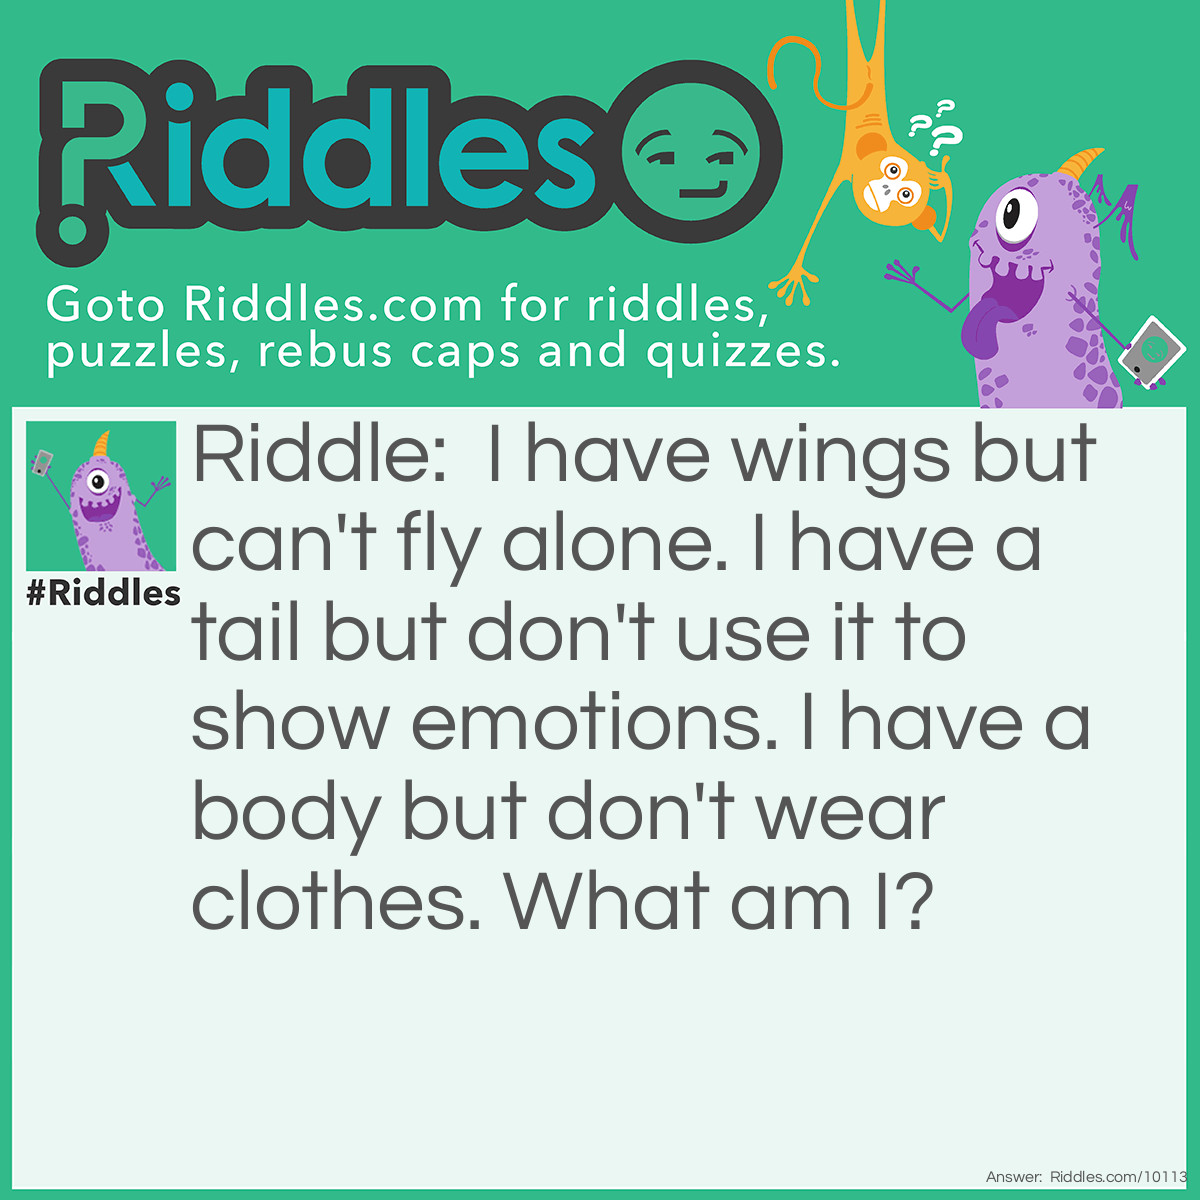 Riddle: I have wings but can't fly alone. I have a tail but don't use it to show emotions. I have a body but don't wear clothes. What am I? Answer: A plane.